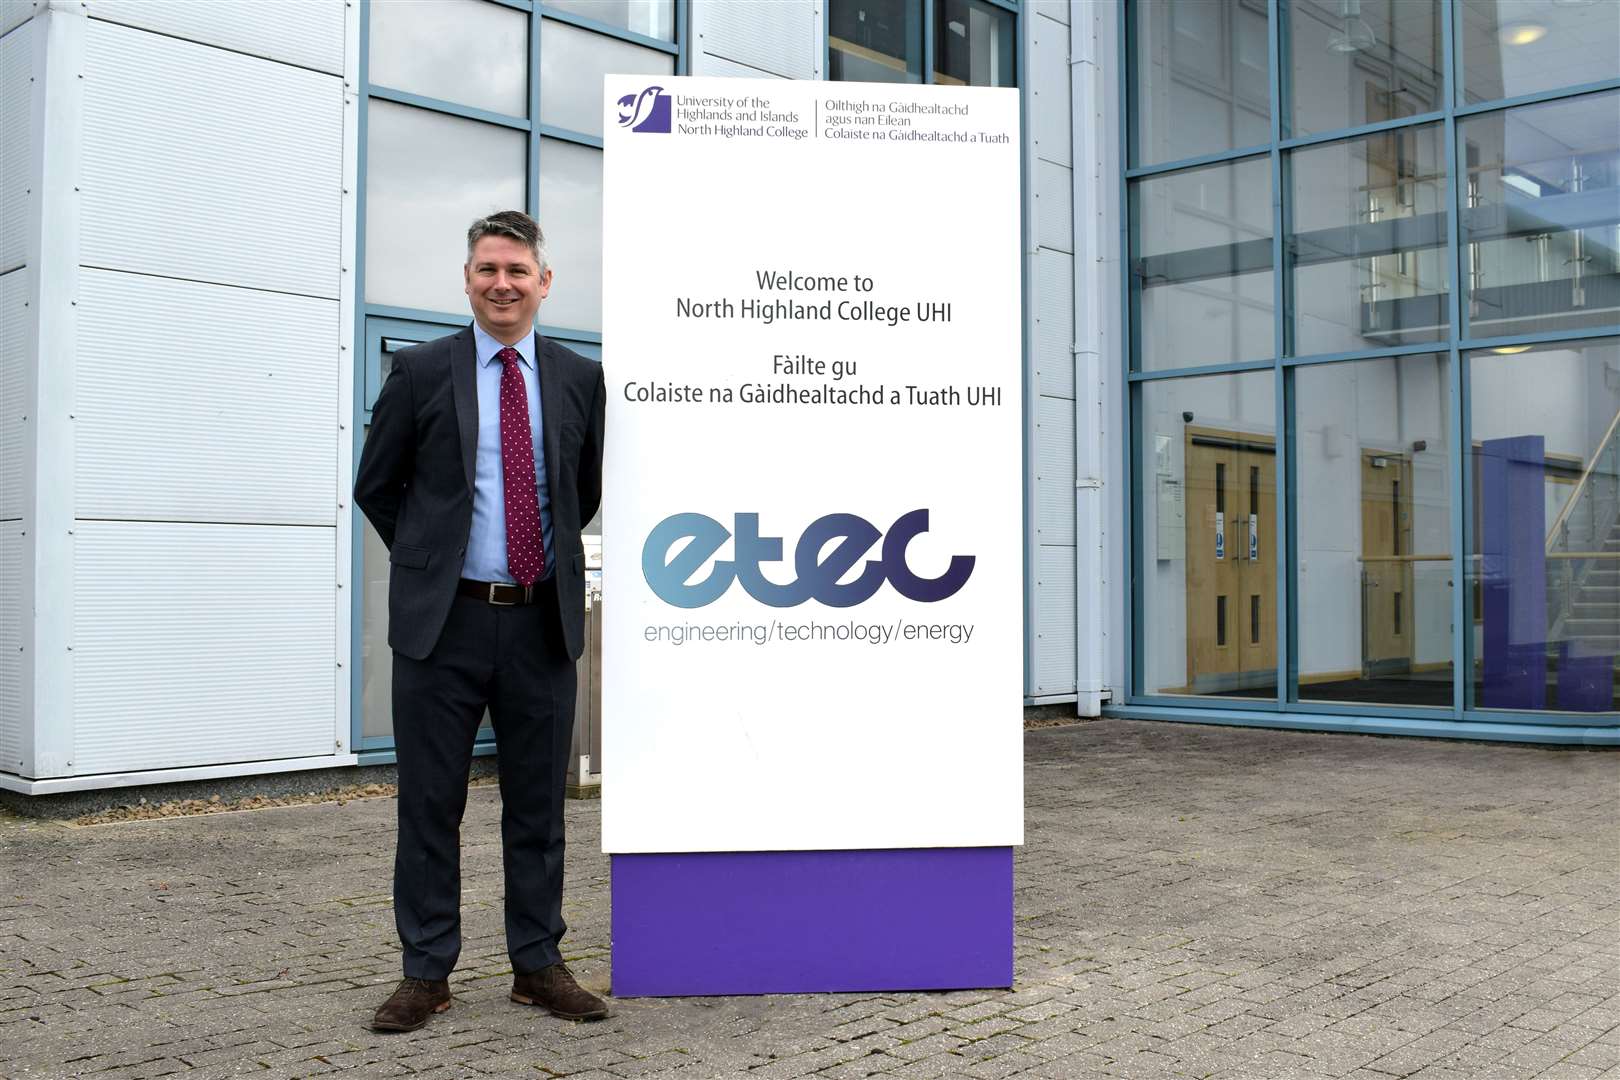 ETEC director Giles Huby, who is responsible for leading health and safety matters at North Highland College UHI.